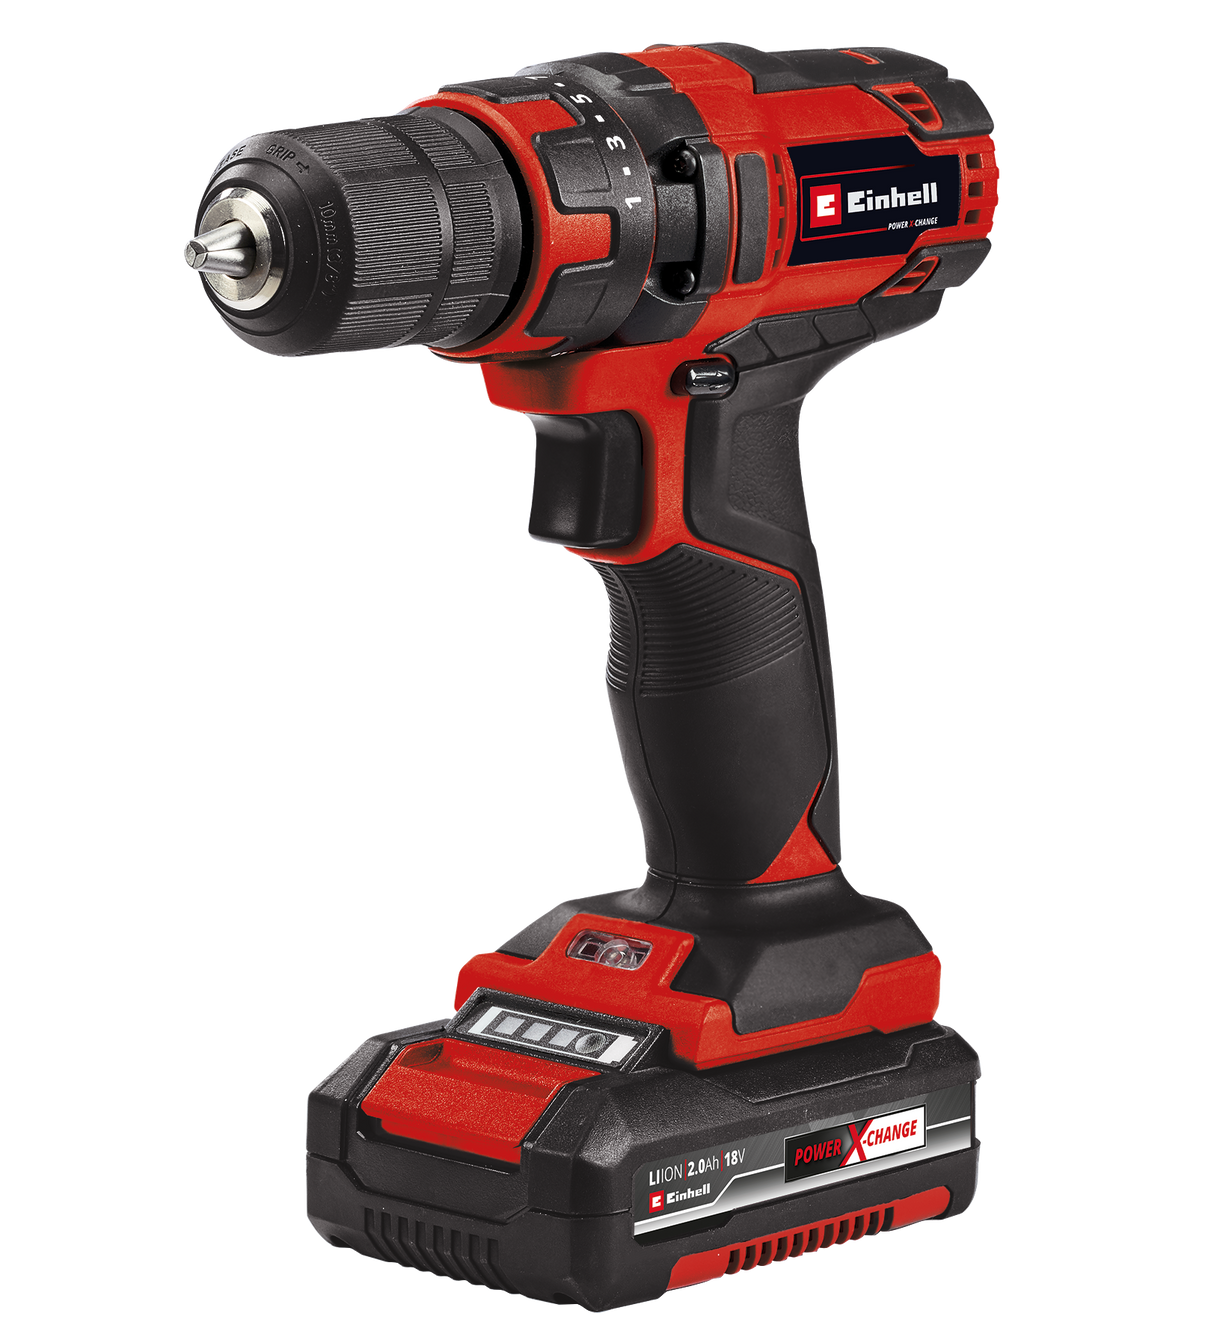 Einhell Power Tools 18V 3/8” Cordless Drill Driver Kit with 2.0 Ah battery and charger